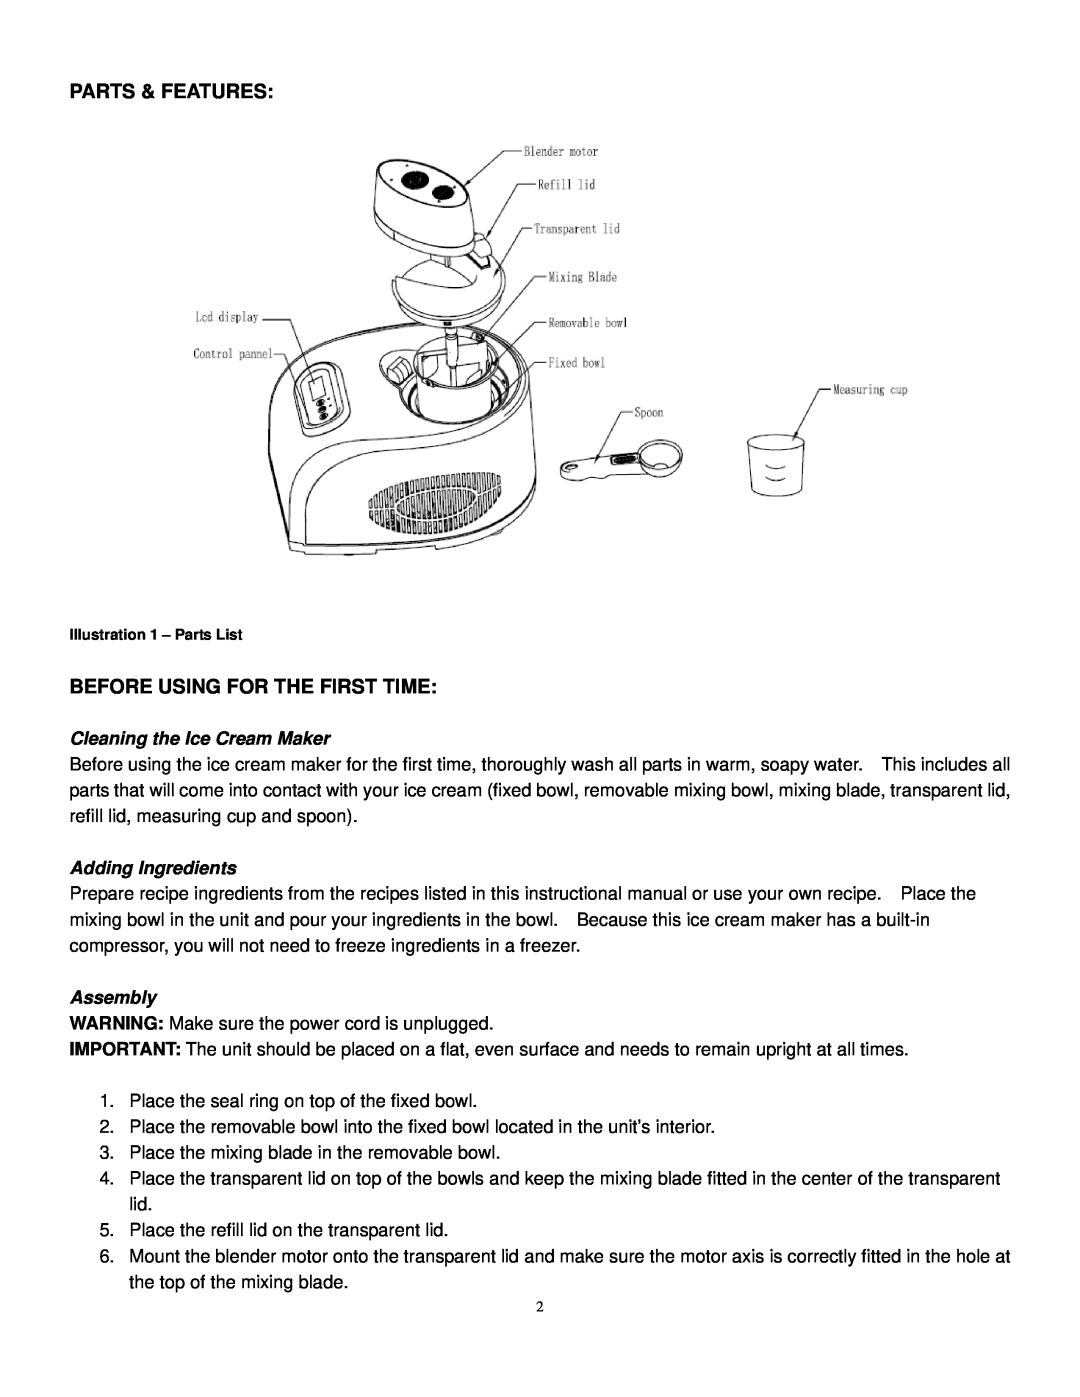 NewAir AIC-220 instruction manual Cleaning the Ice Cream Maker, Adding Ingredients, Assembly 